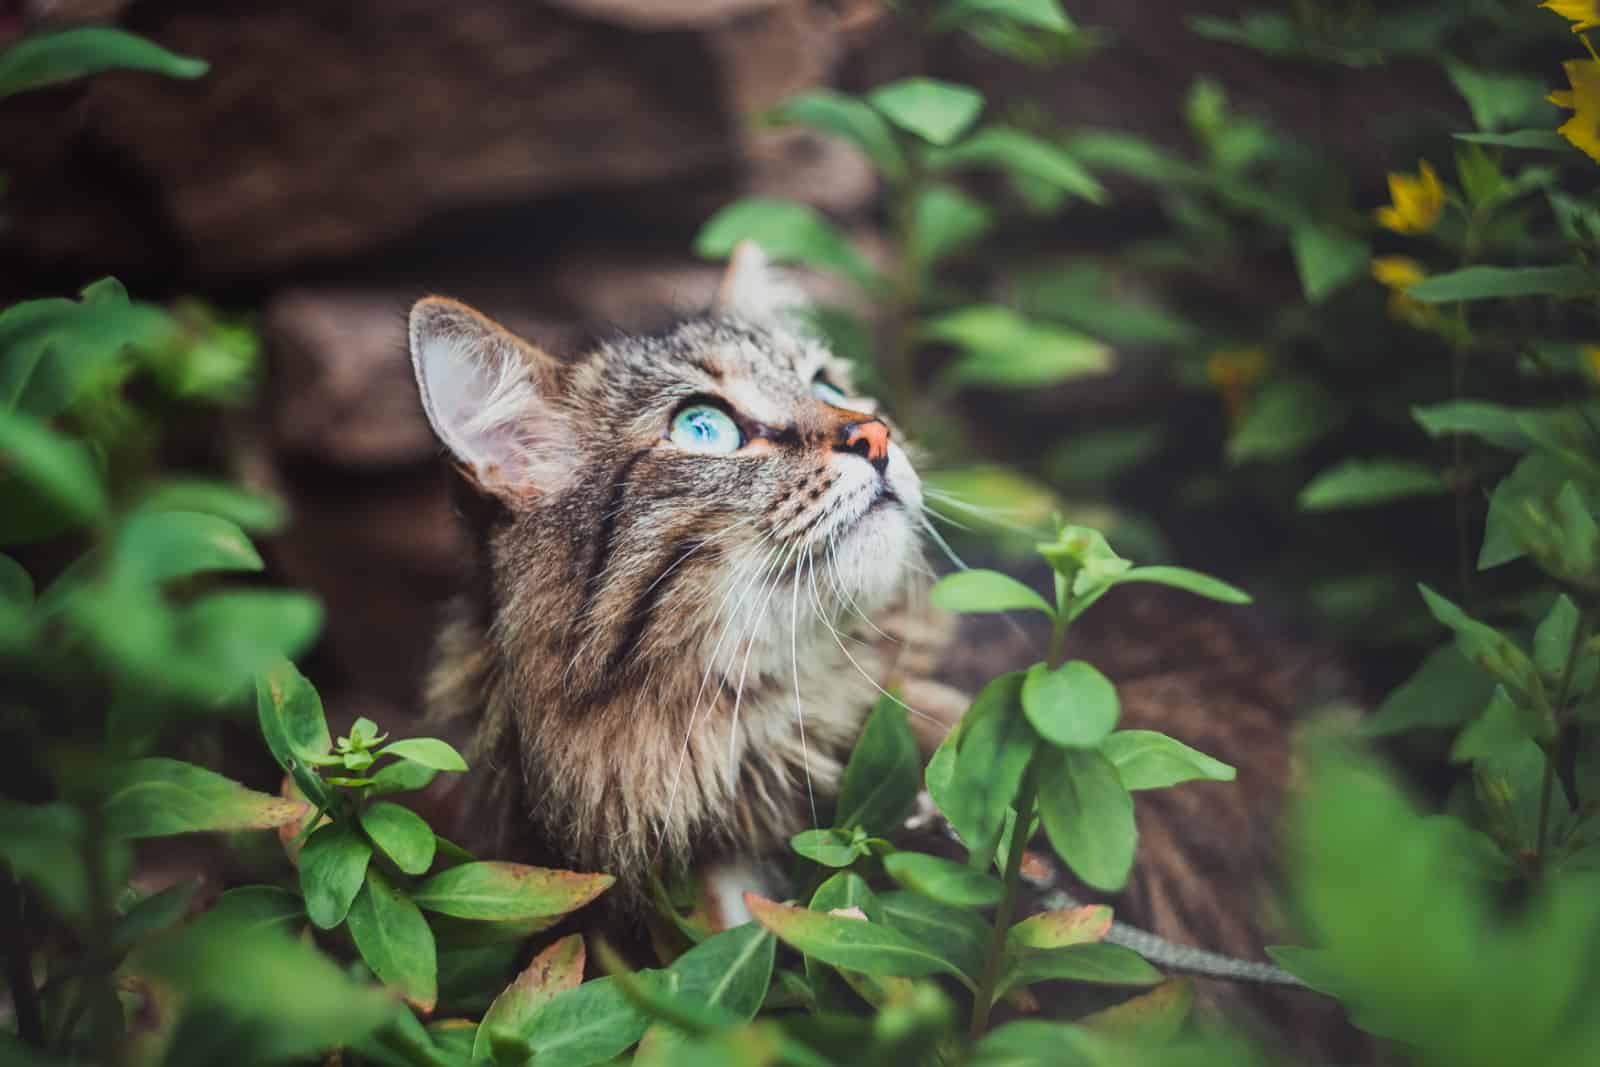 A tabby cat sits in the garden and looks up